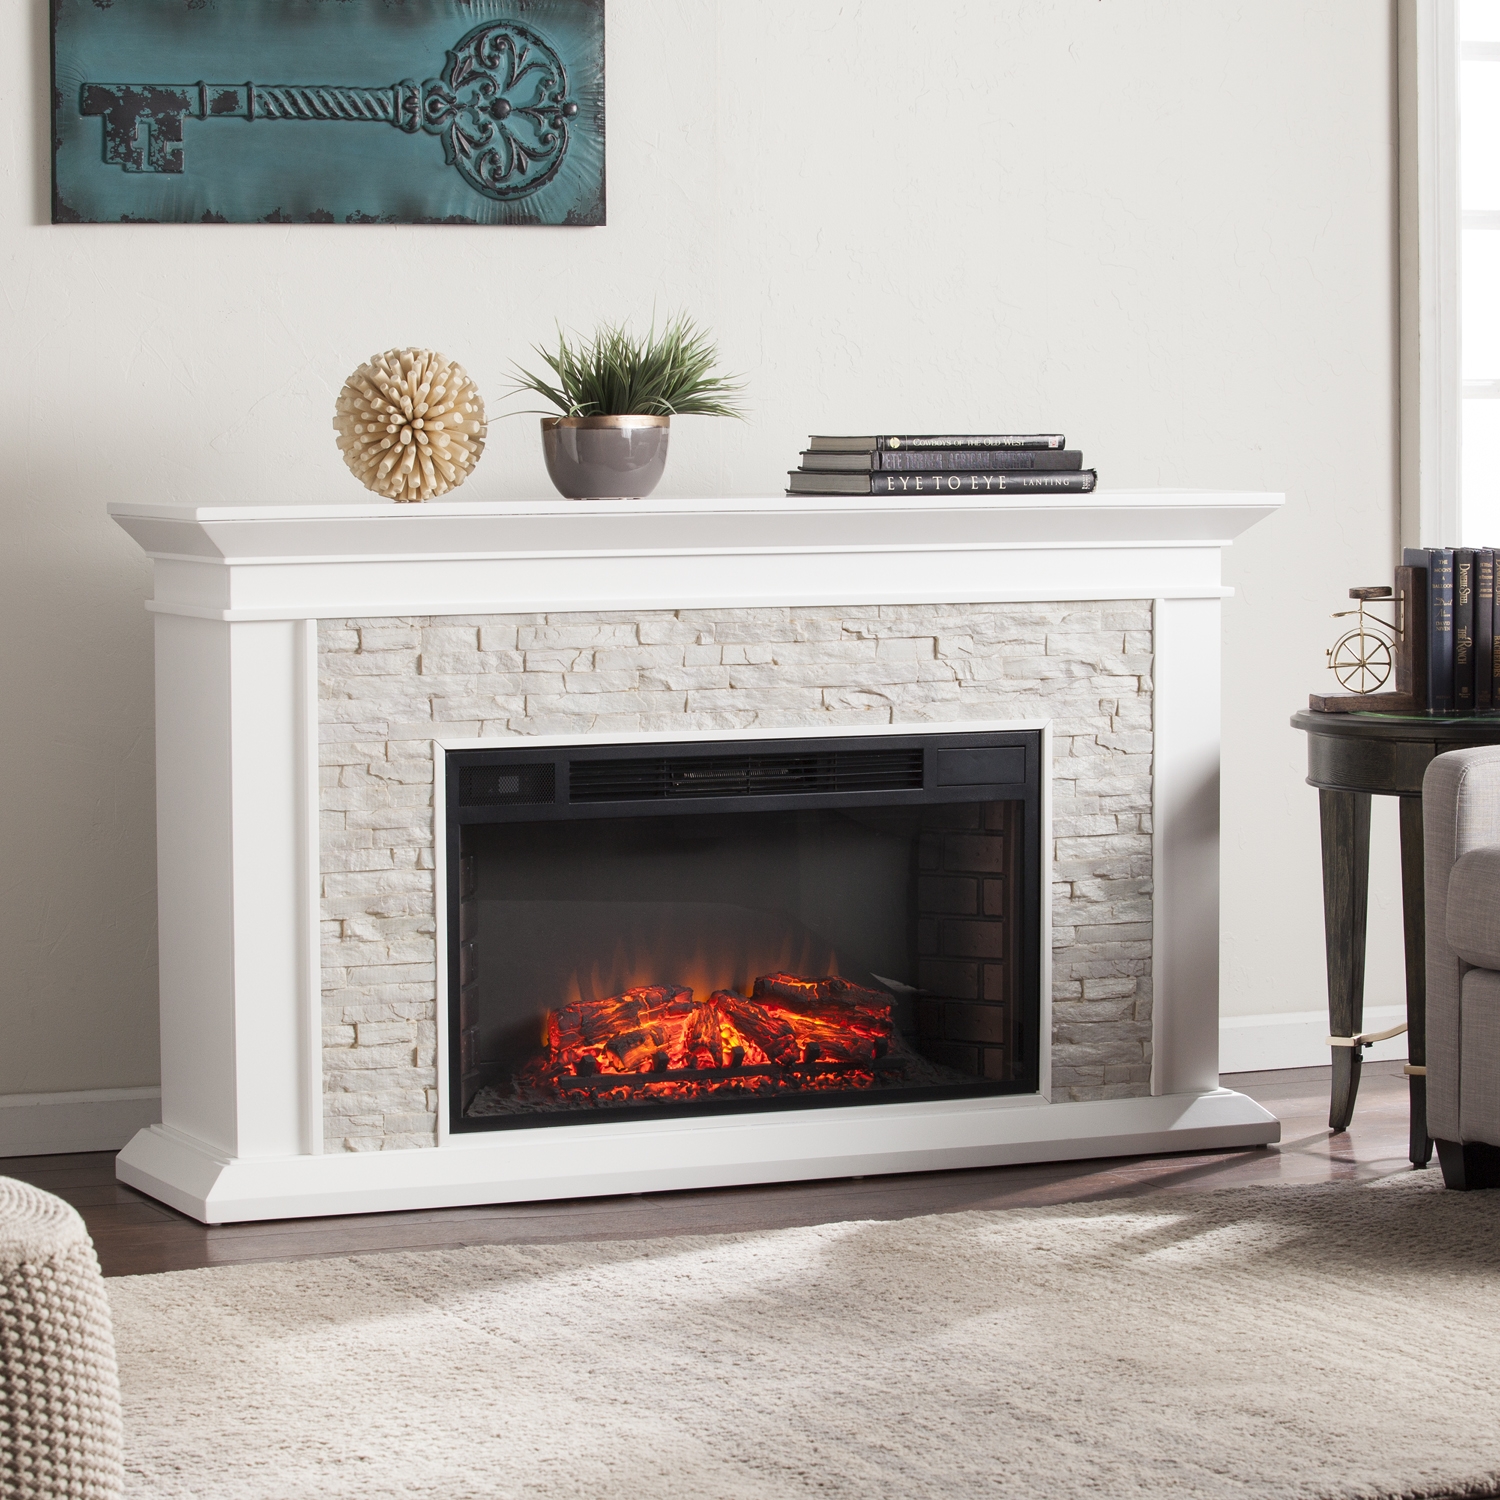 Febo Flame Electric Fireplace Unique White Fireplace Electric Charming Fireplace